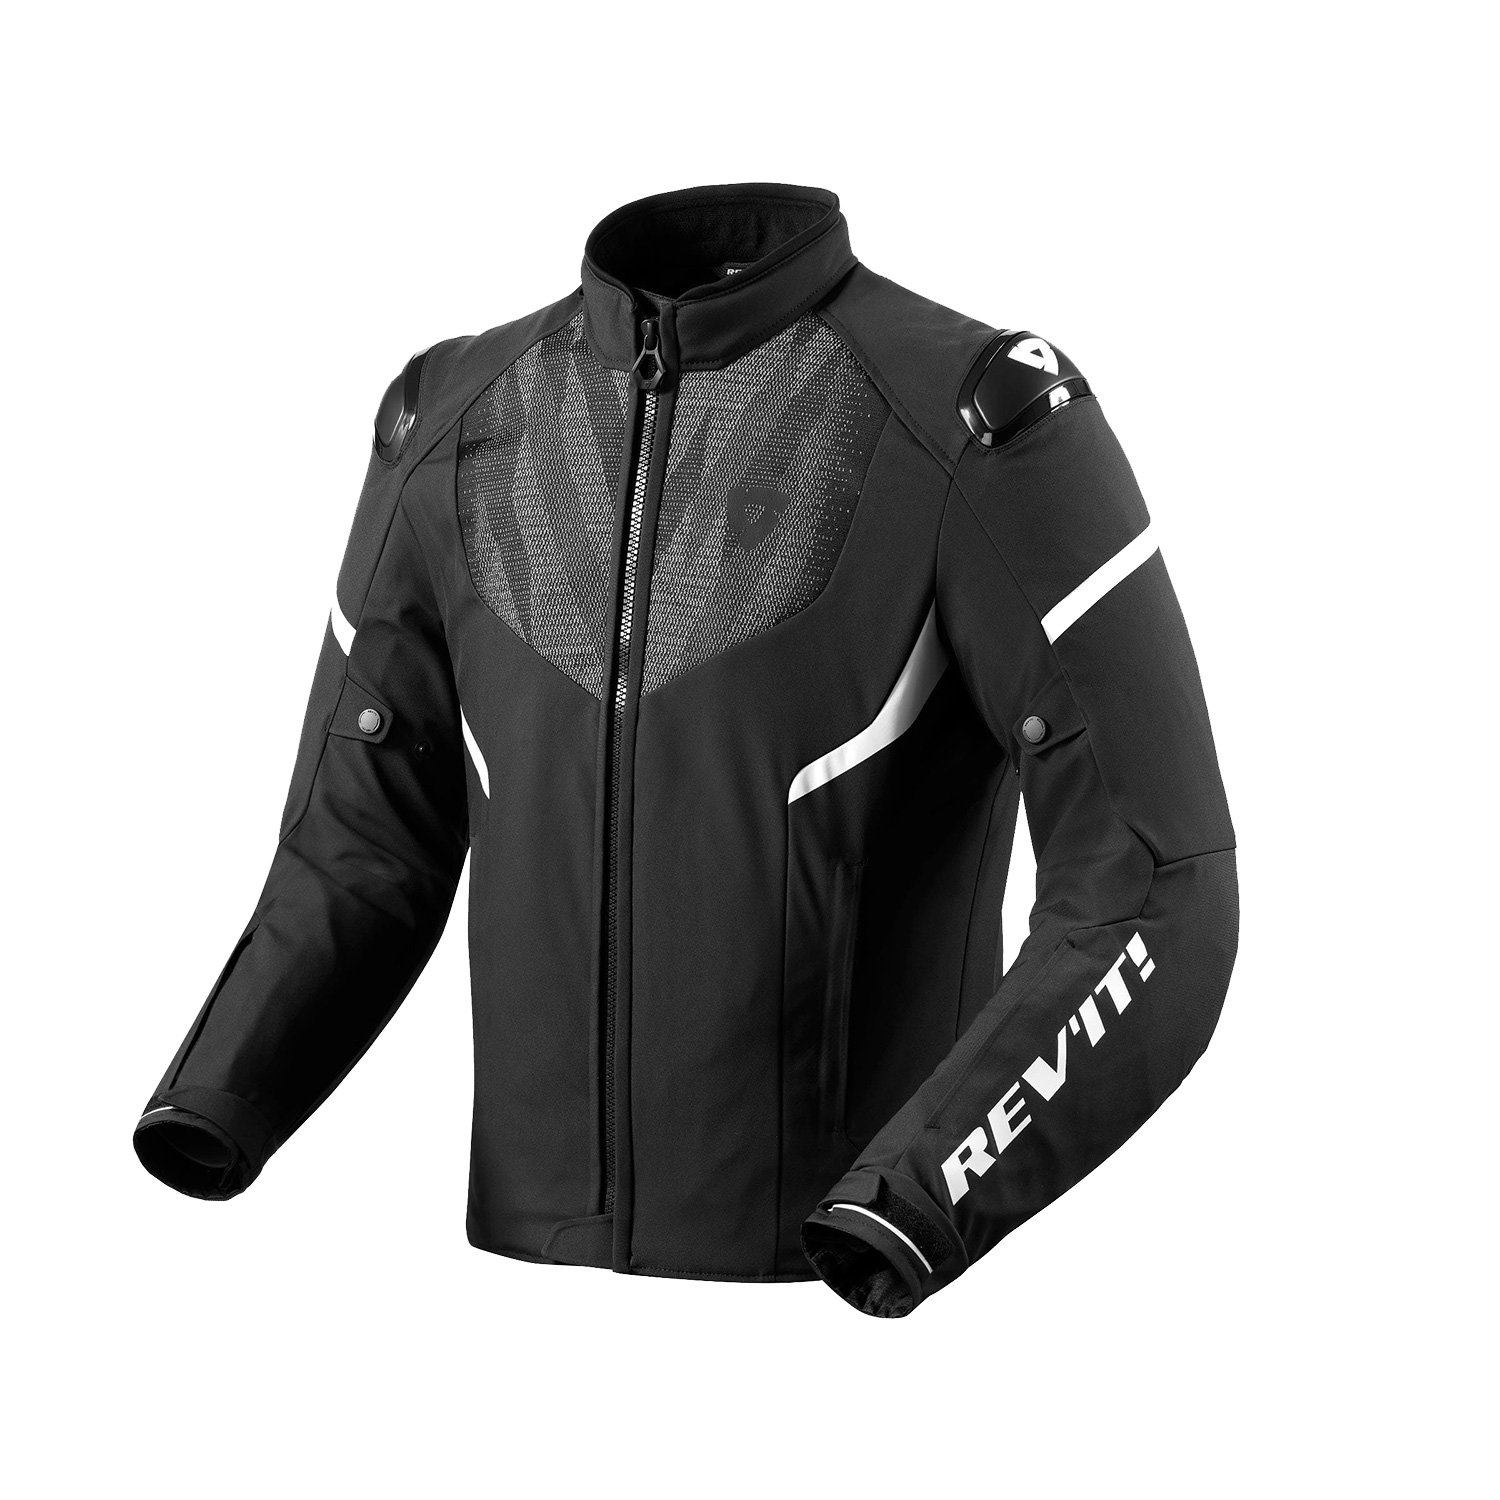 Image of REV'IT! Hyperspeed 2 H2O Jacket Black White Size S ID 8700001367400